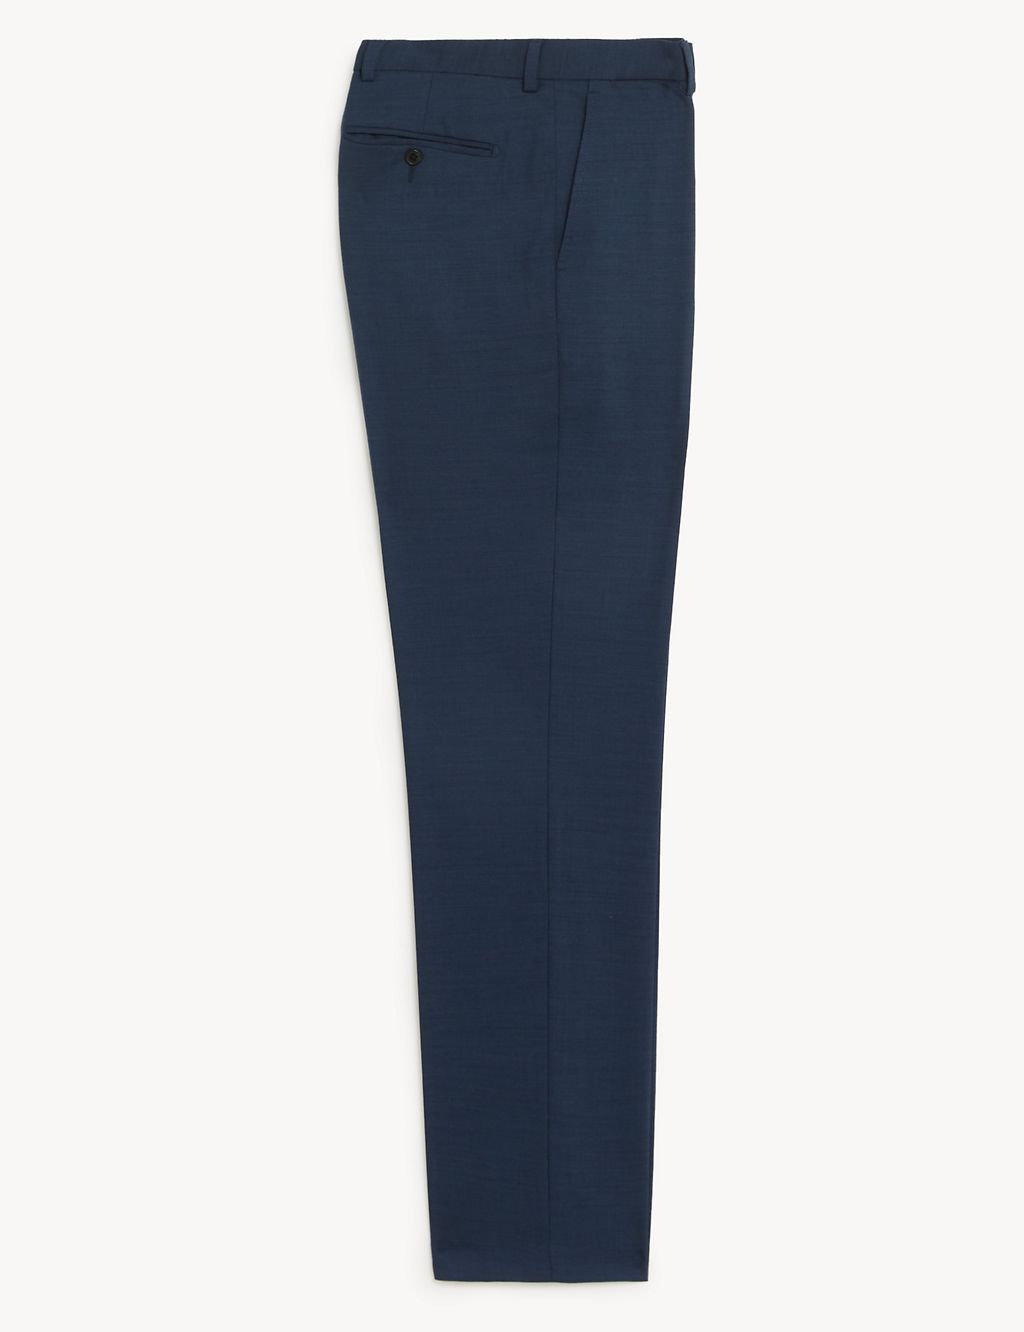 Regular Fit Wool Blend Flat Front Trousers 3 of 3